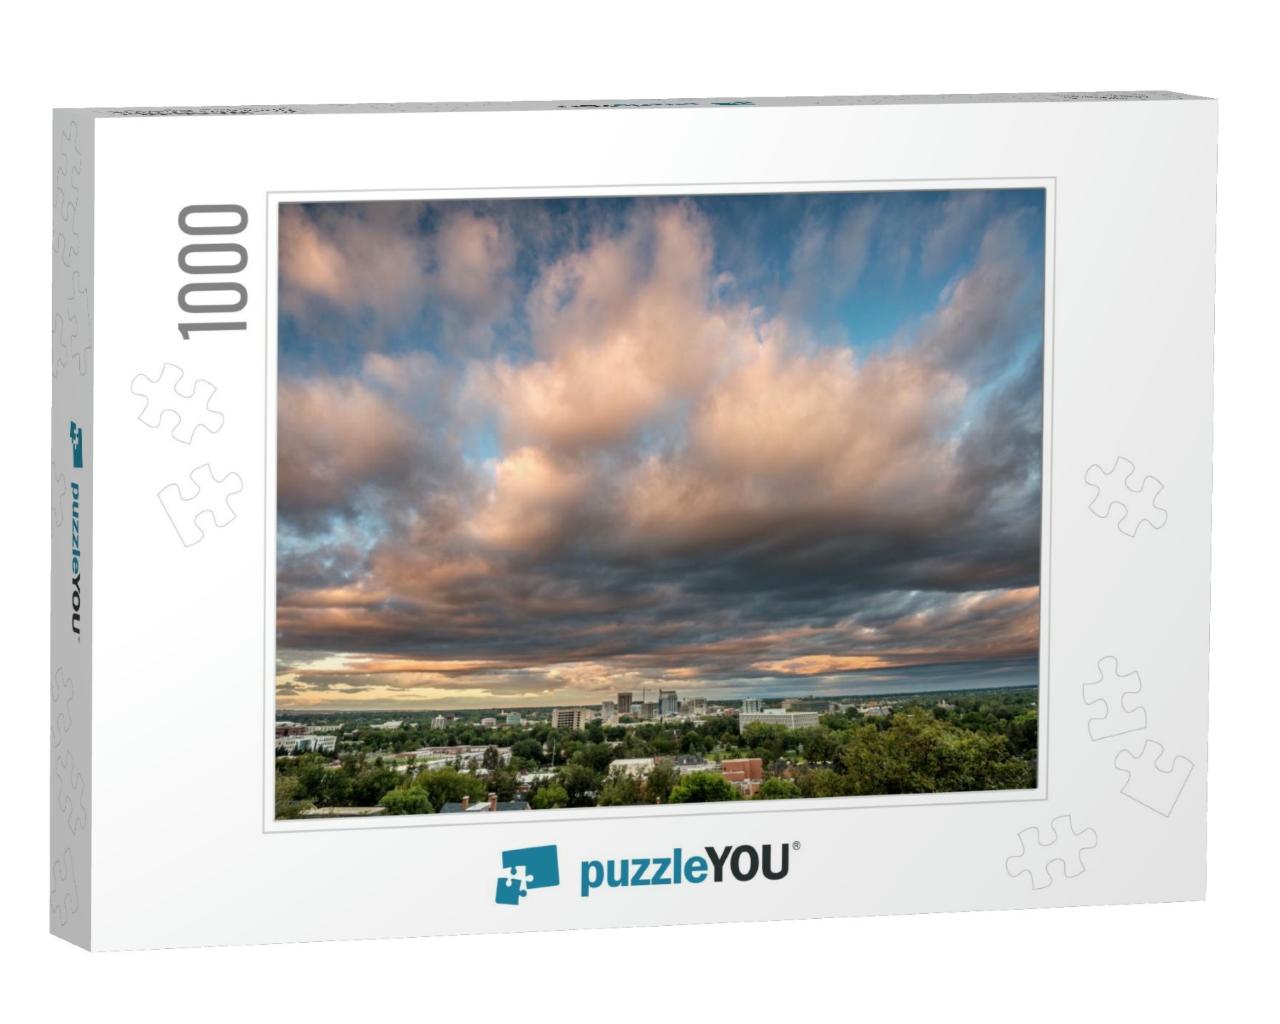 Colors of Morning Paint the Clouds Over Boise Idaho... Jigsaw Puzzle with 1000 pieces